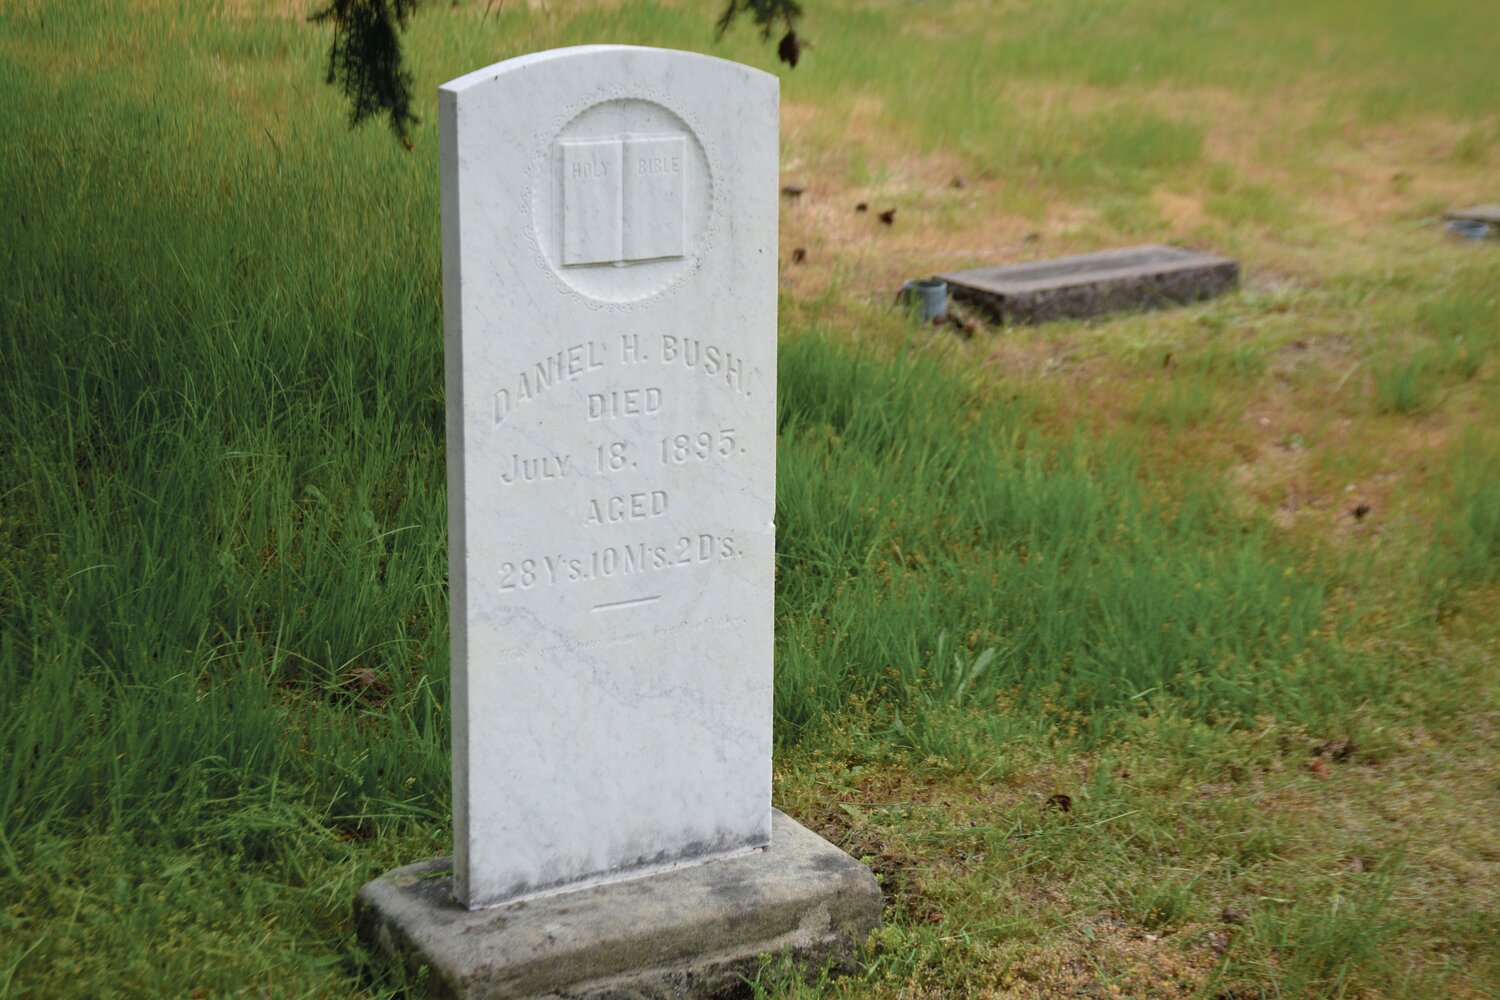 A headstone is pictured after it was cleaned a D/2 formula, which restores the surface.